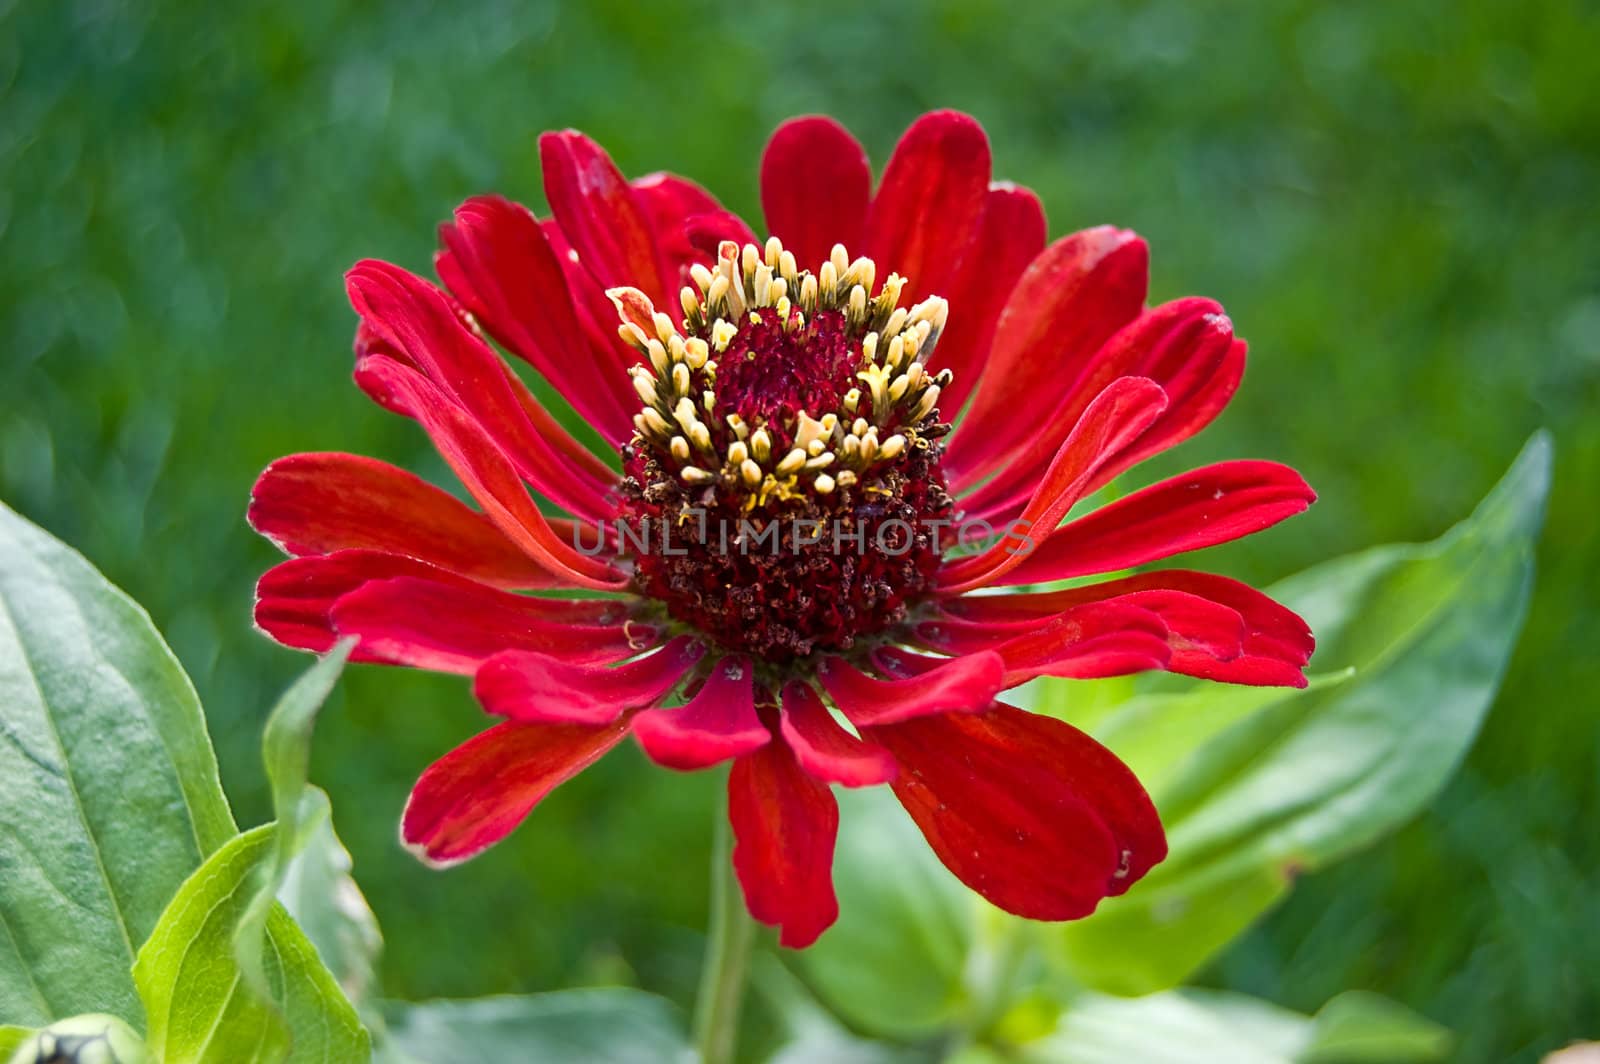 beautiful, colorful zinnia red flower over green